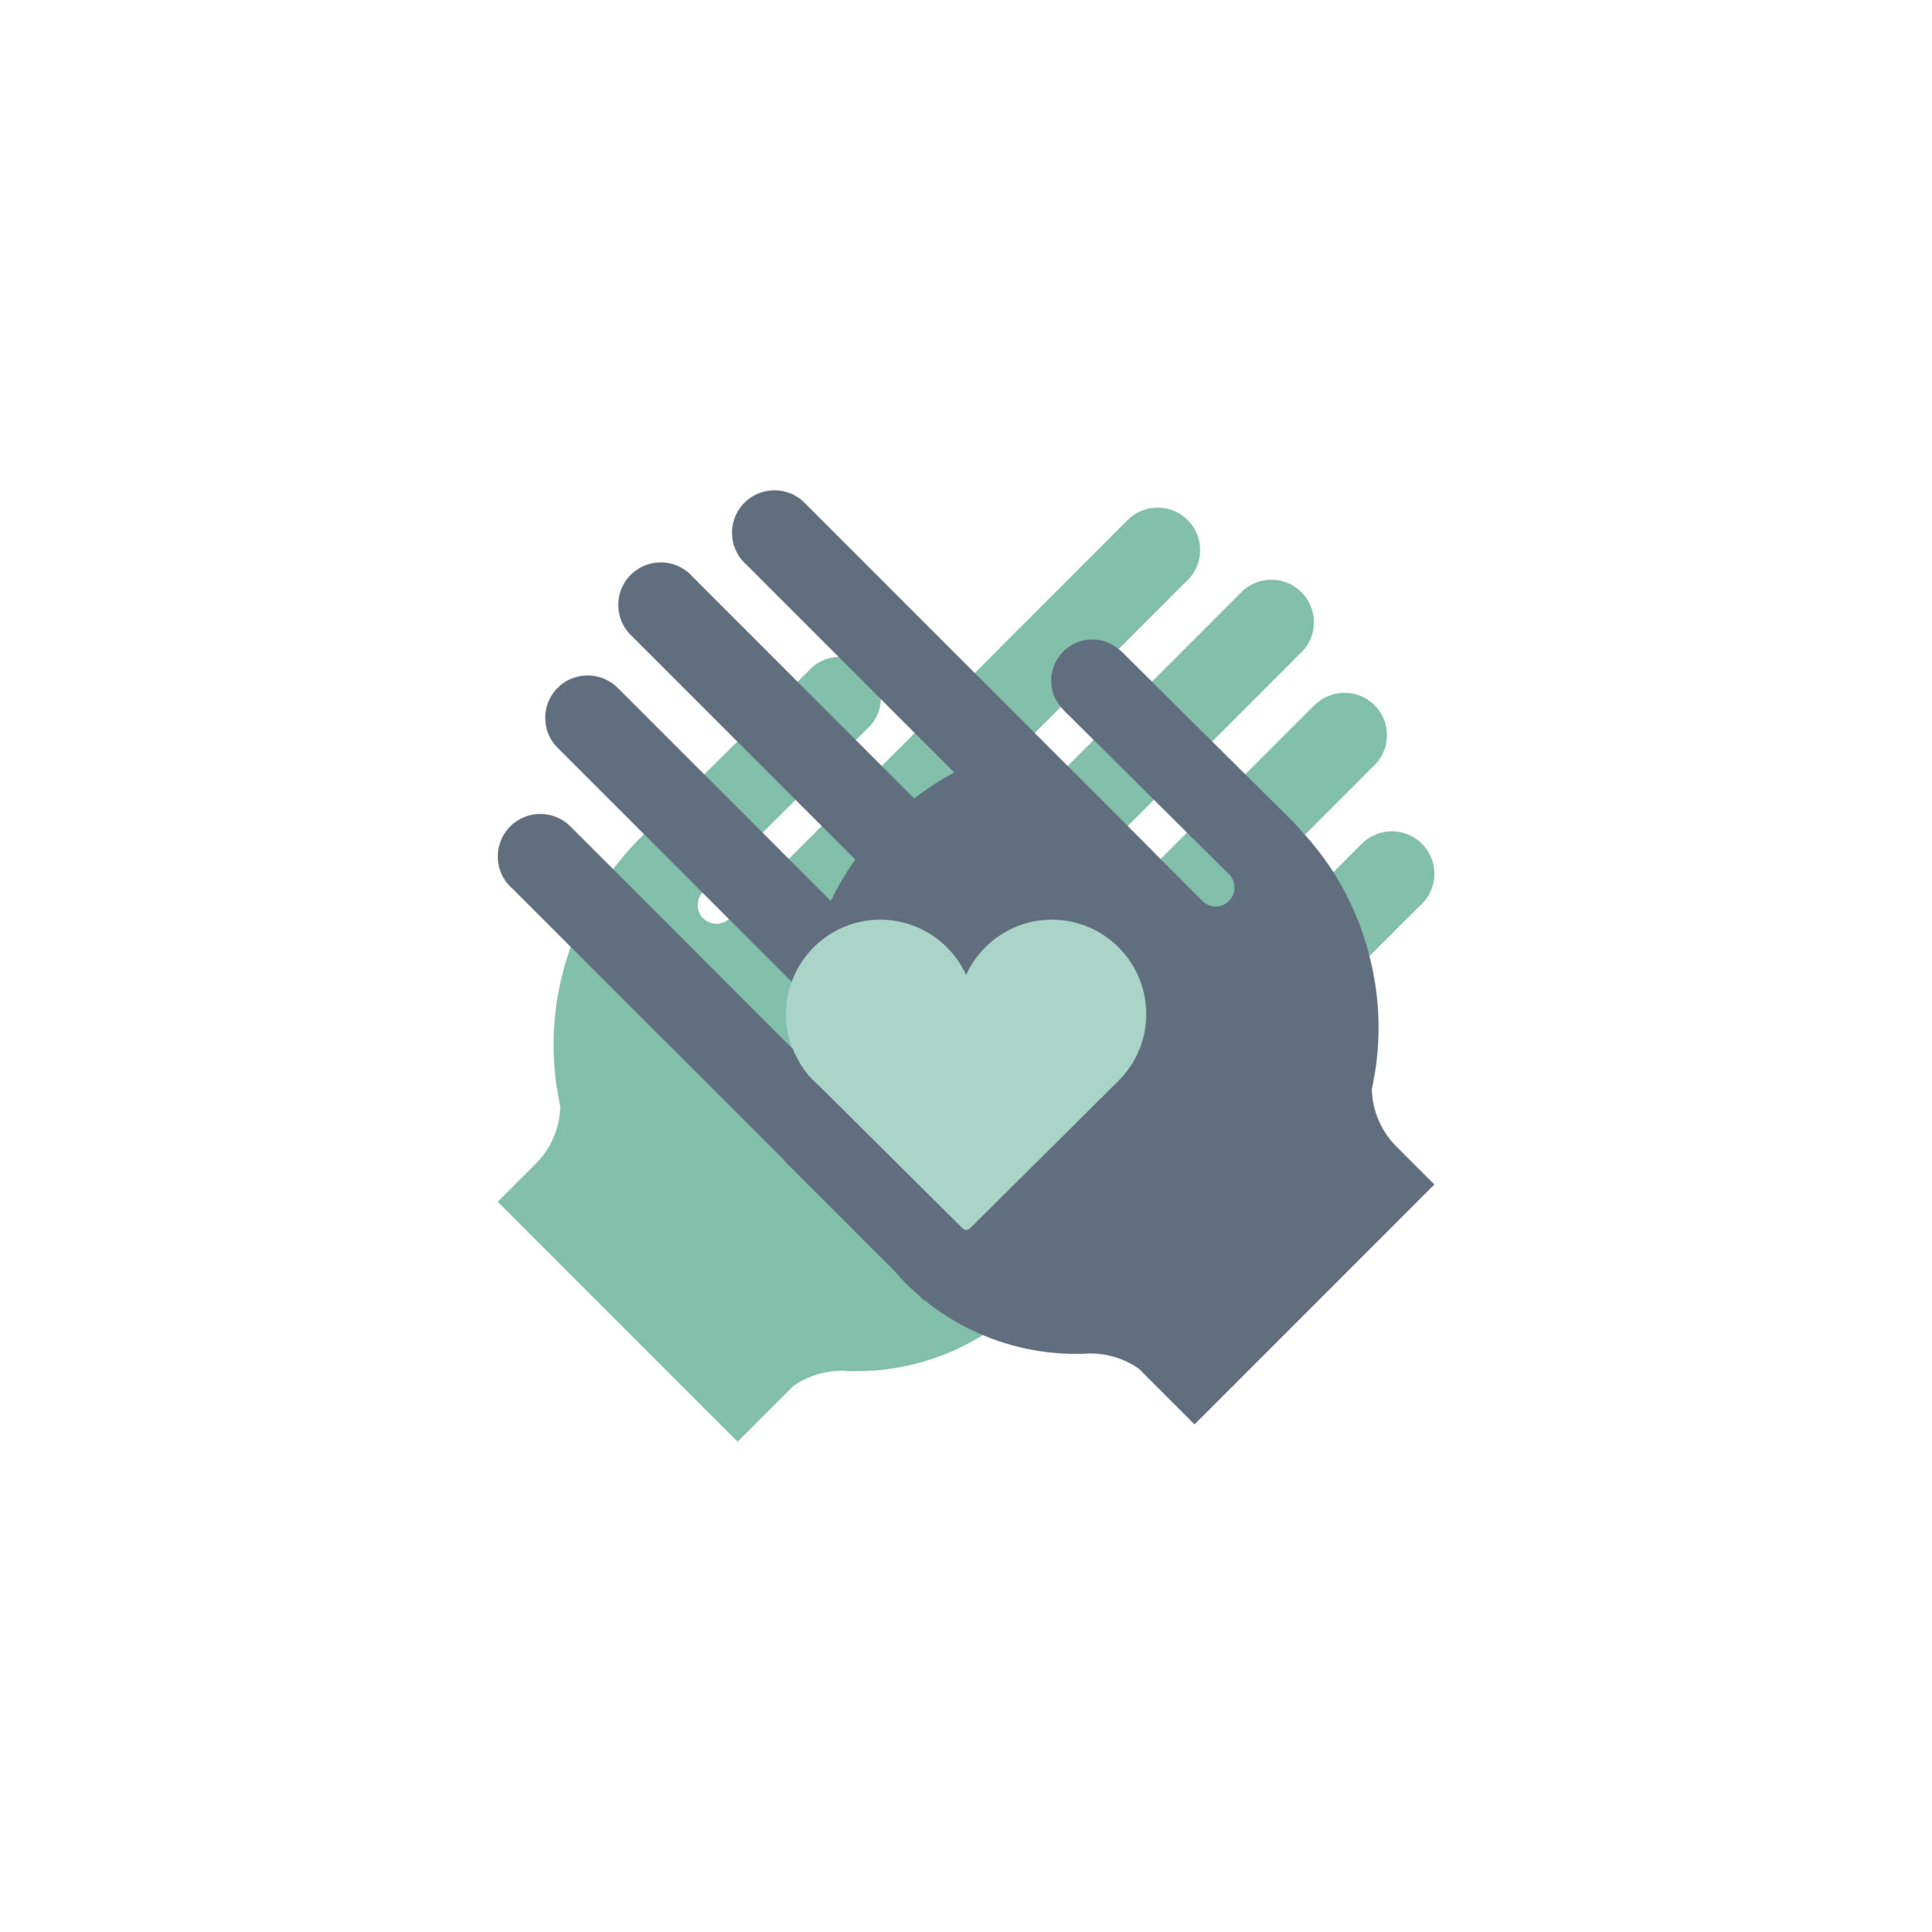 Illustration of helping hands support icons